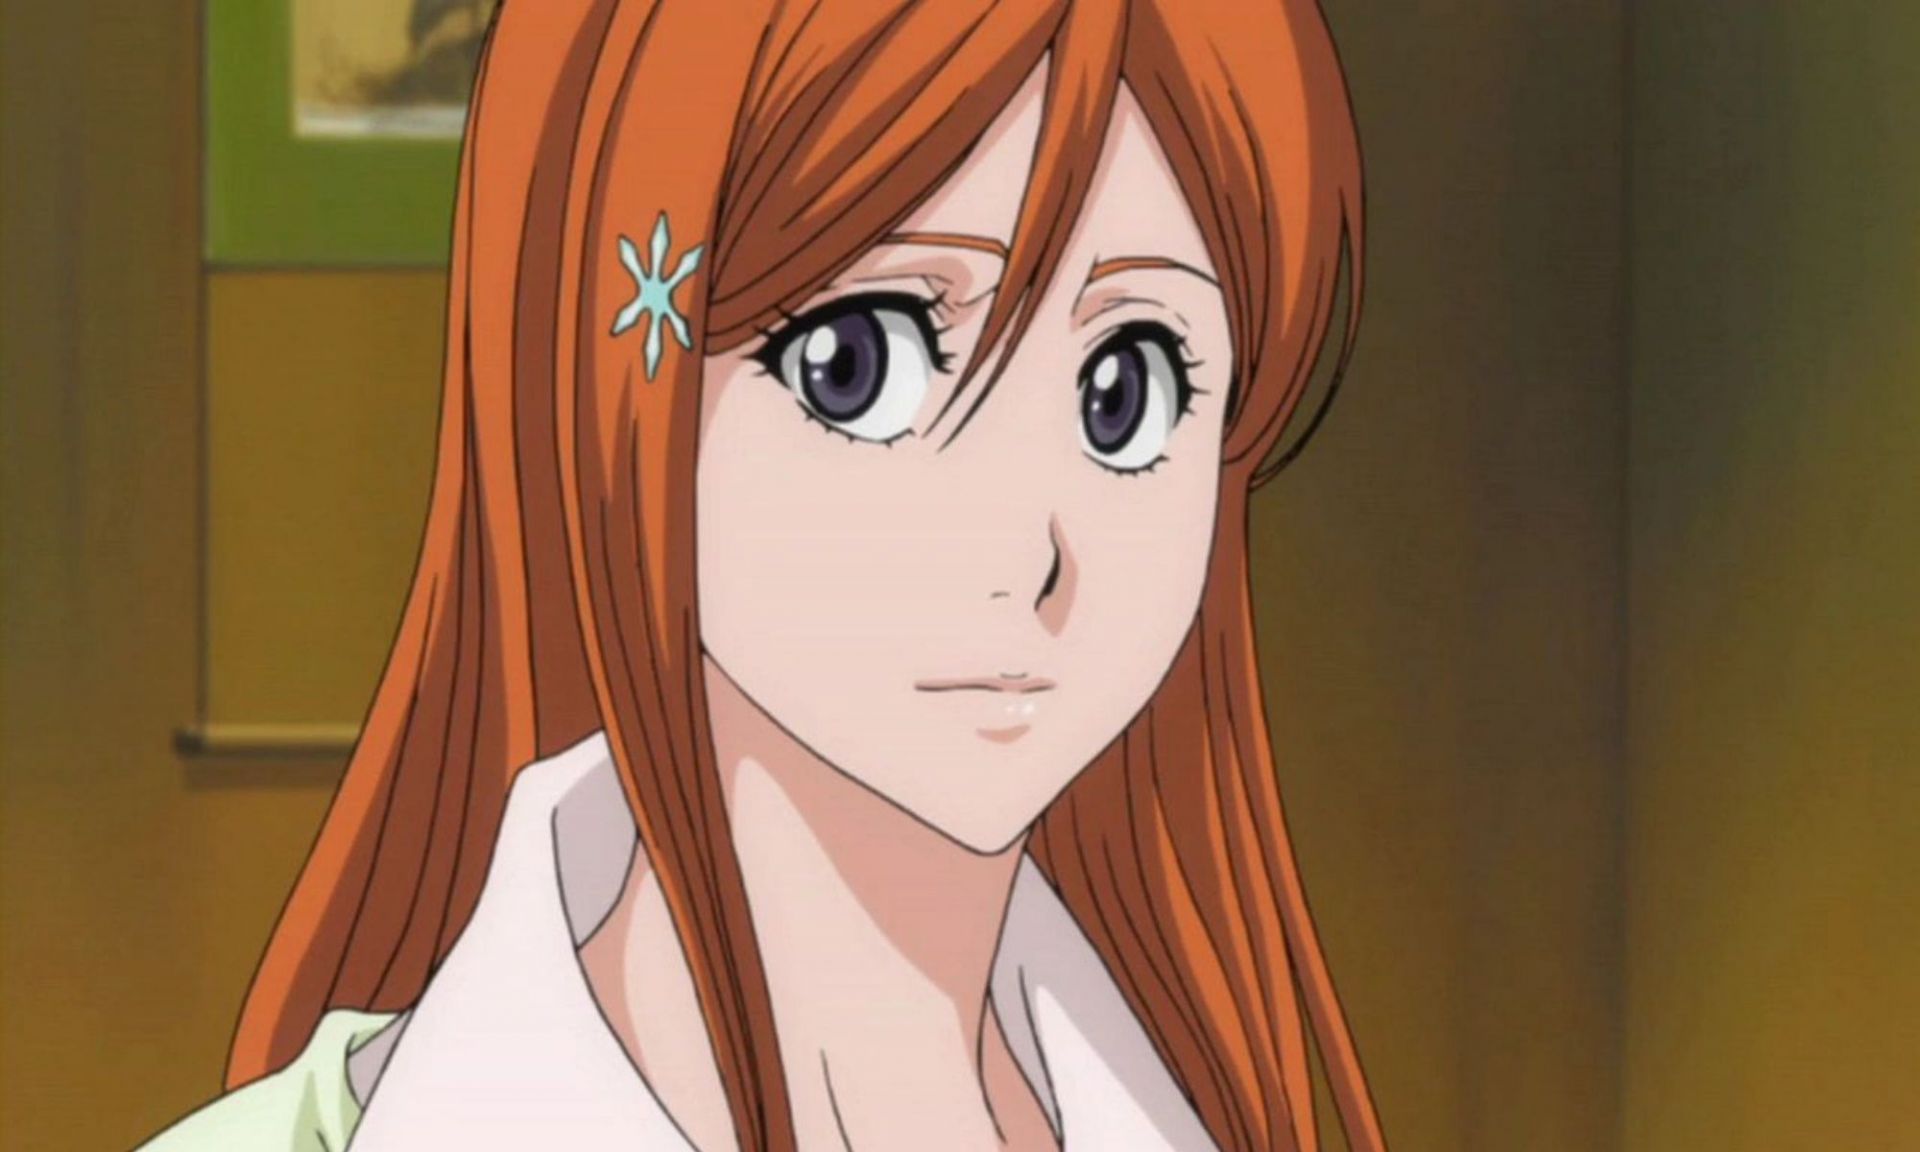 Orihime always provides valuable support for Ichigo